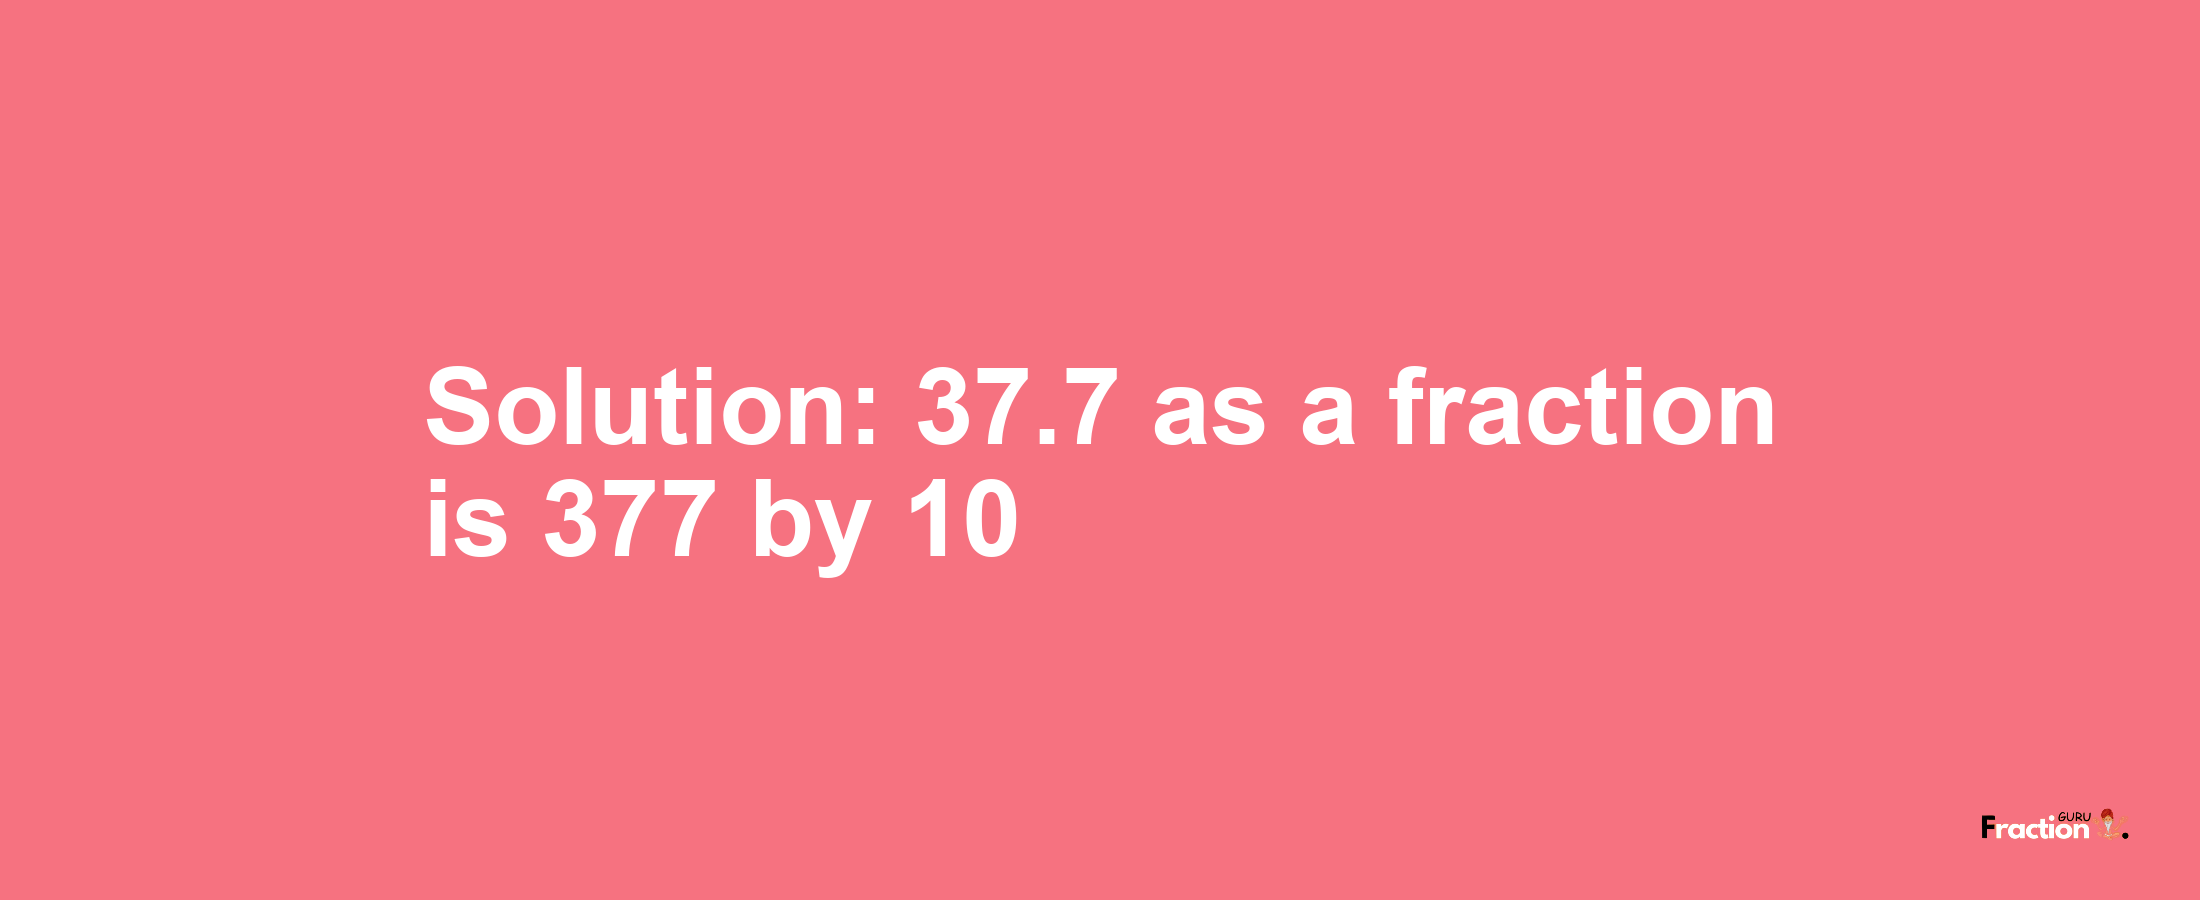 Solution:37.7 as a fraction is 377/10